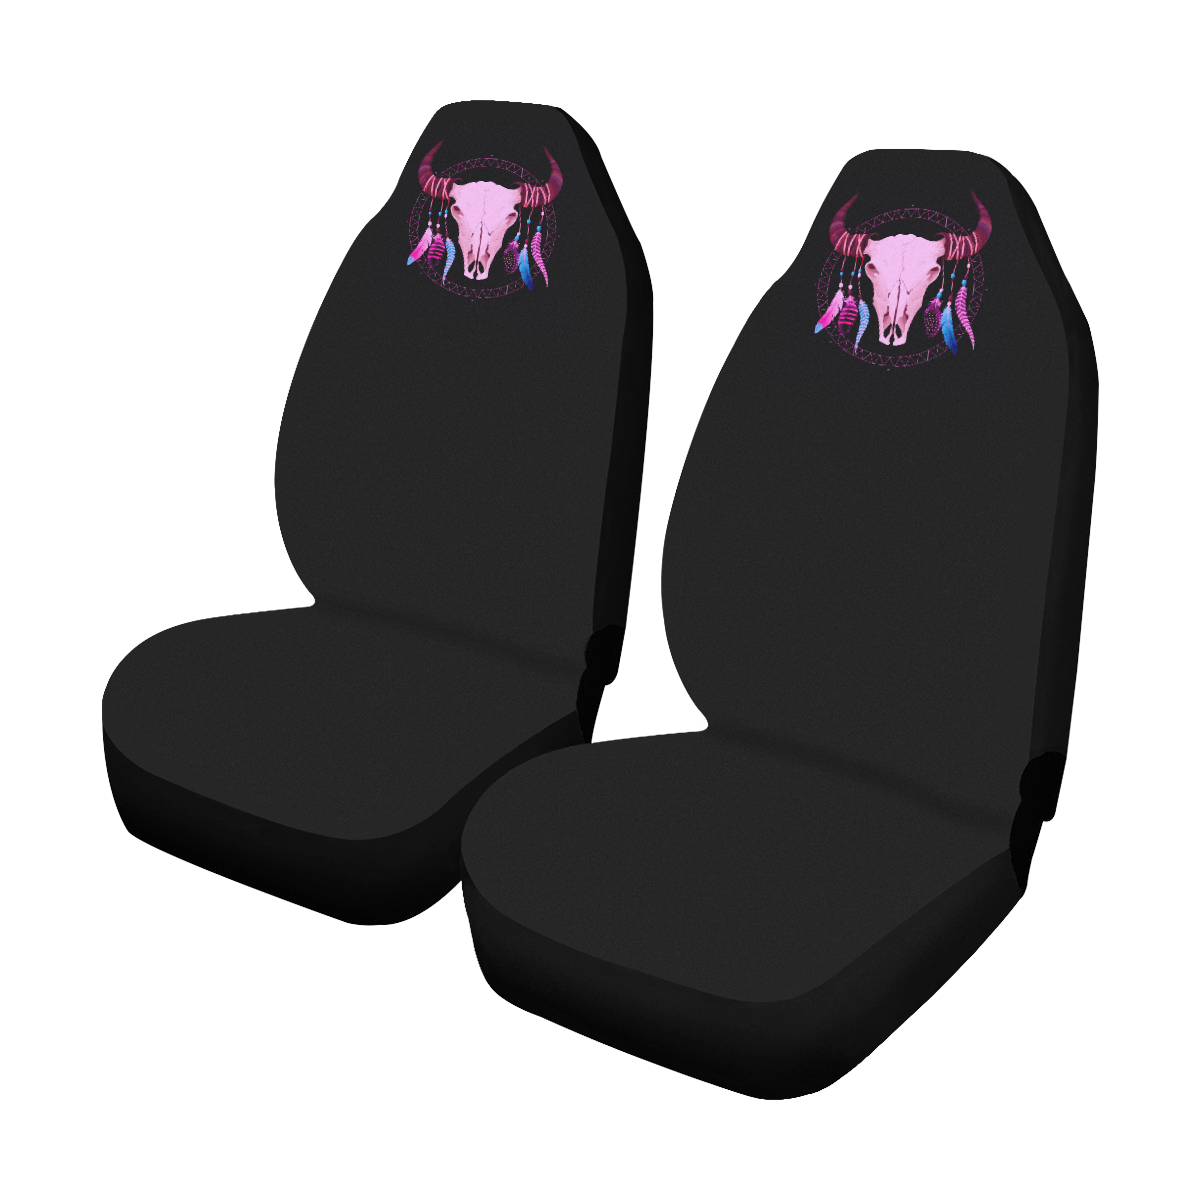 Buffalo Skull with feathers Dreamcatcher Car Seat Covers (Set of 2)